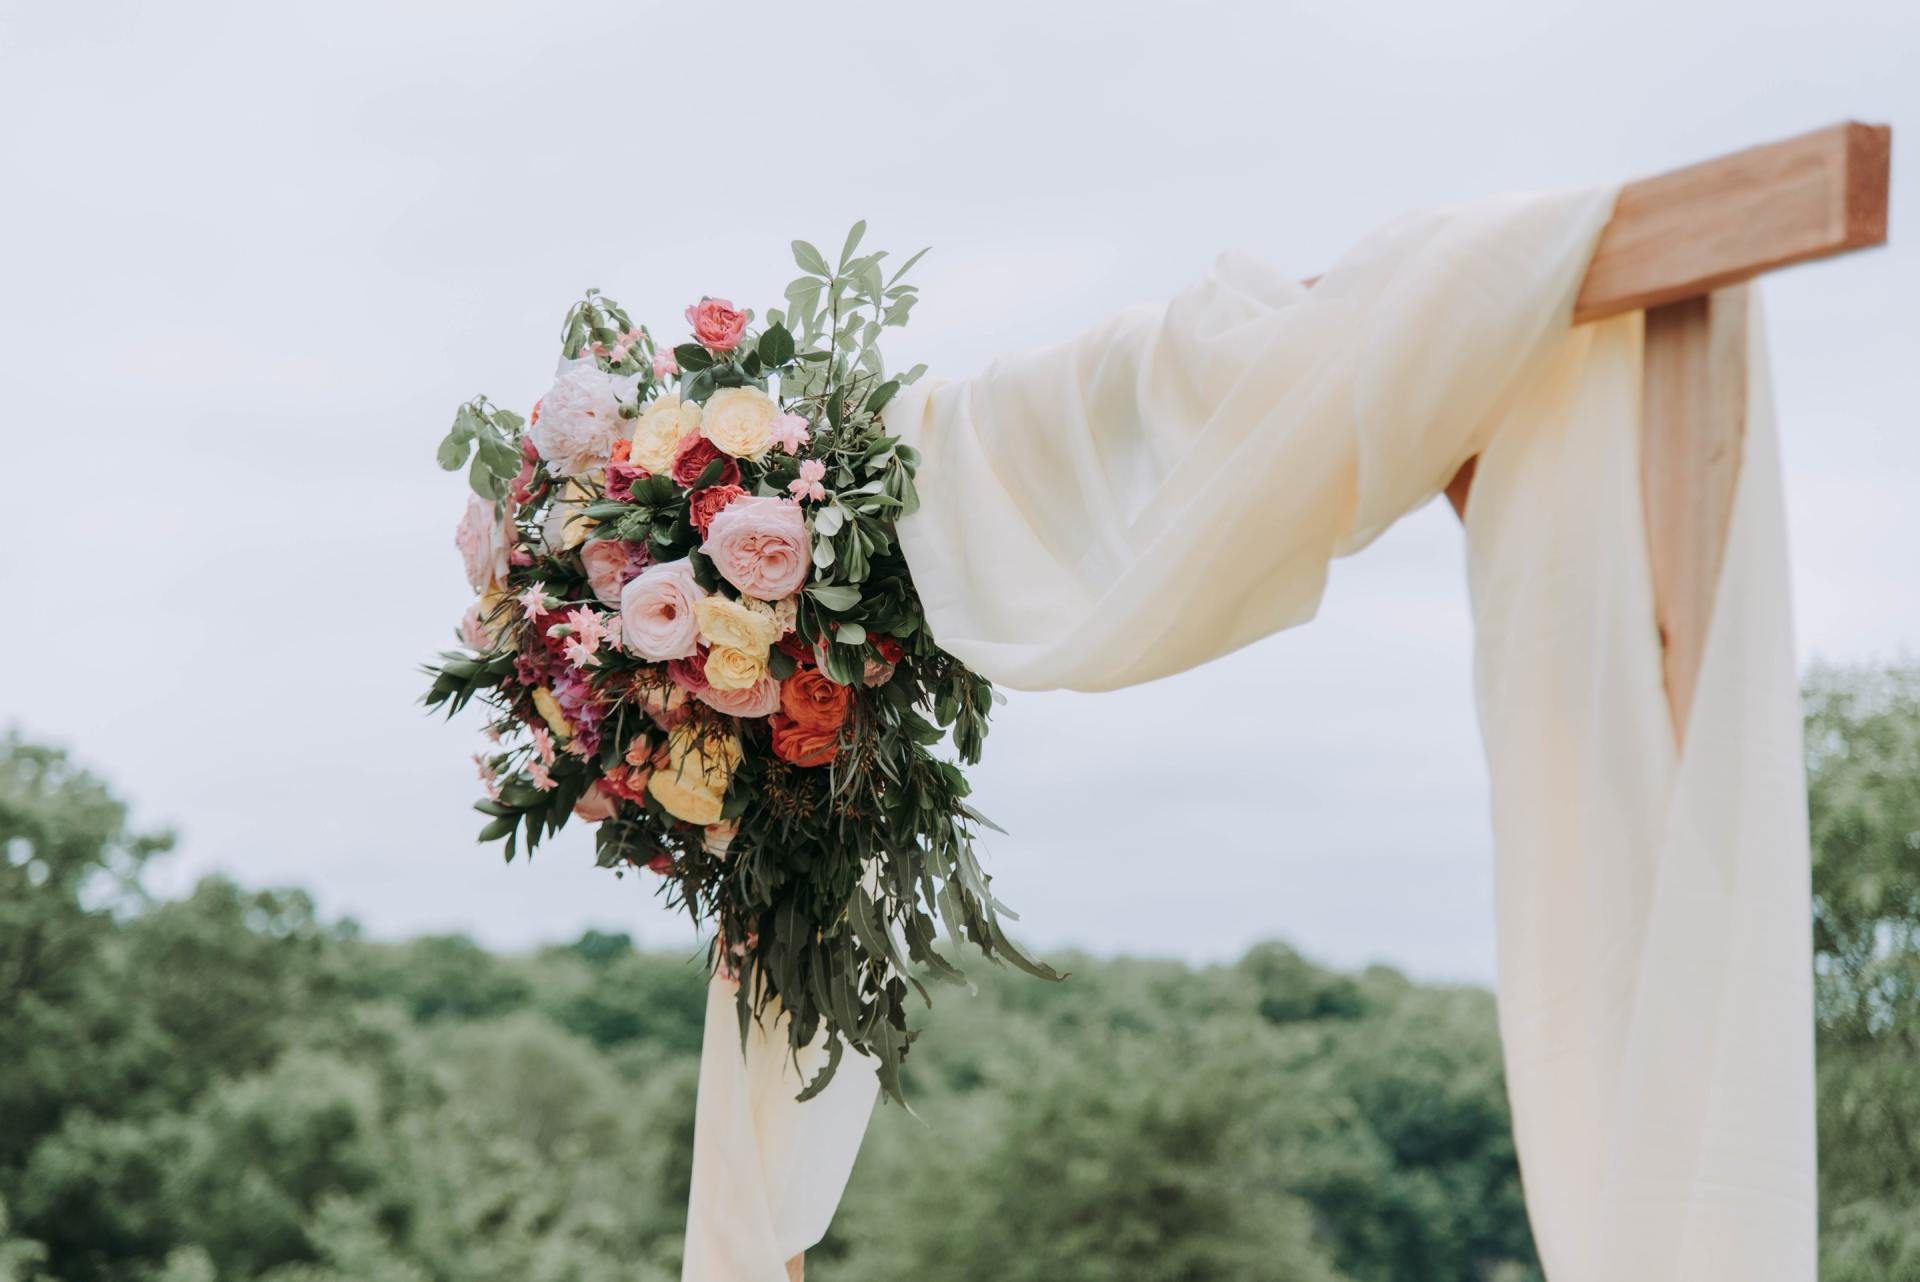 A photo of the top of a square wooden archway with white fabric draped over it and a large bouquet of flowers on the lefthand side